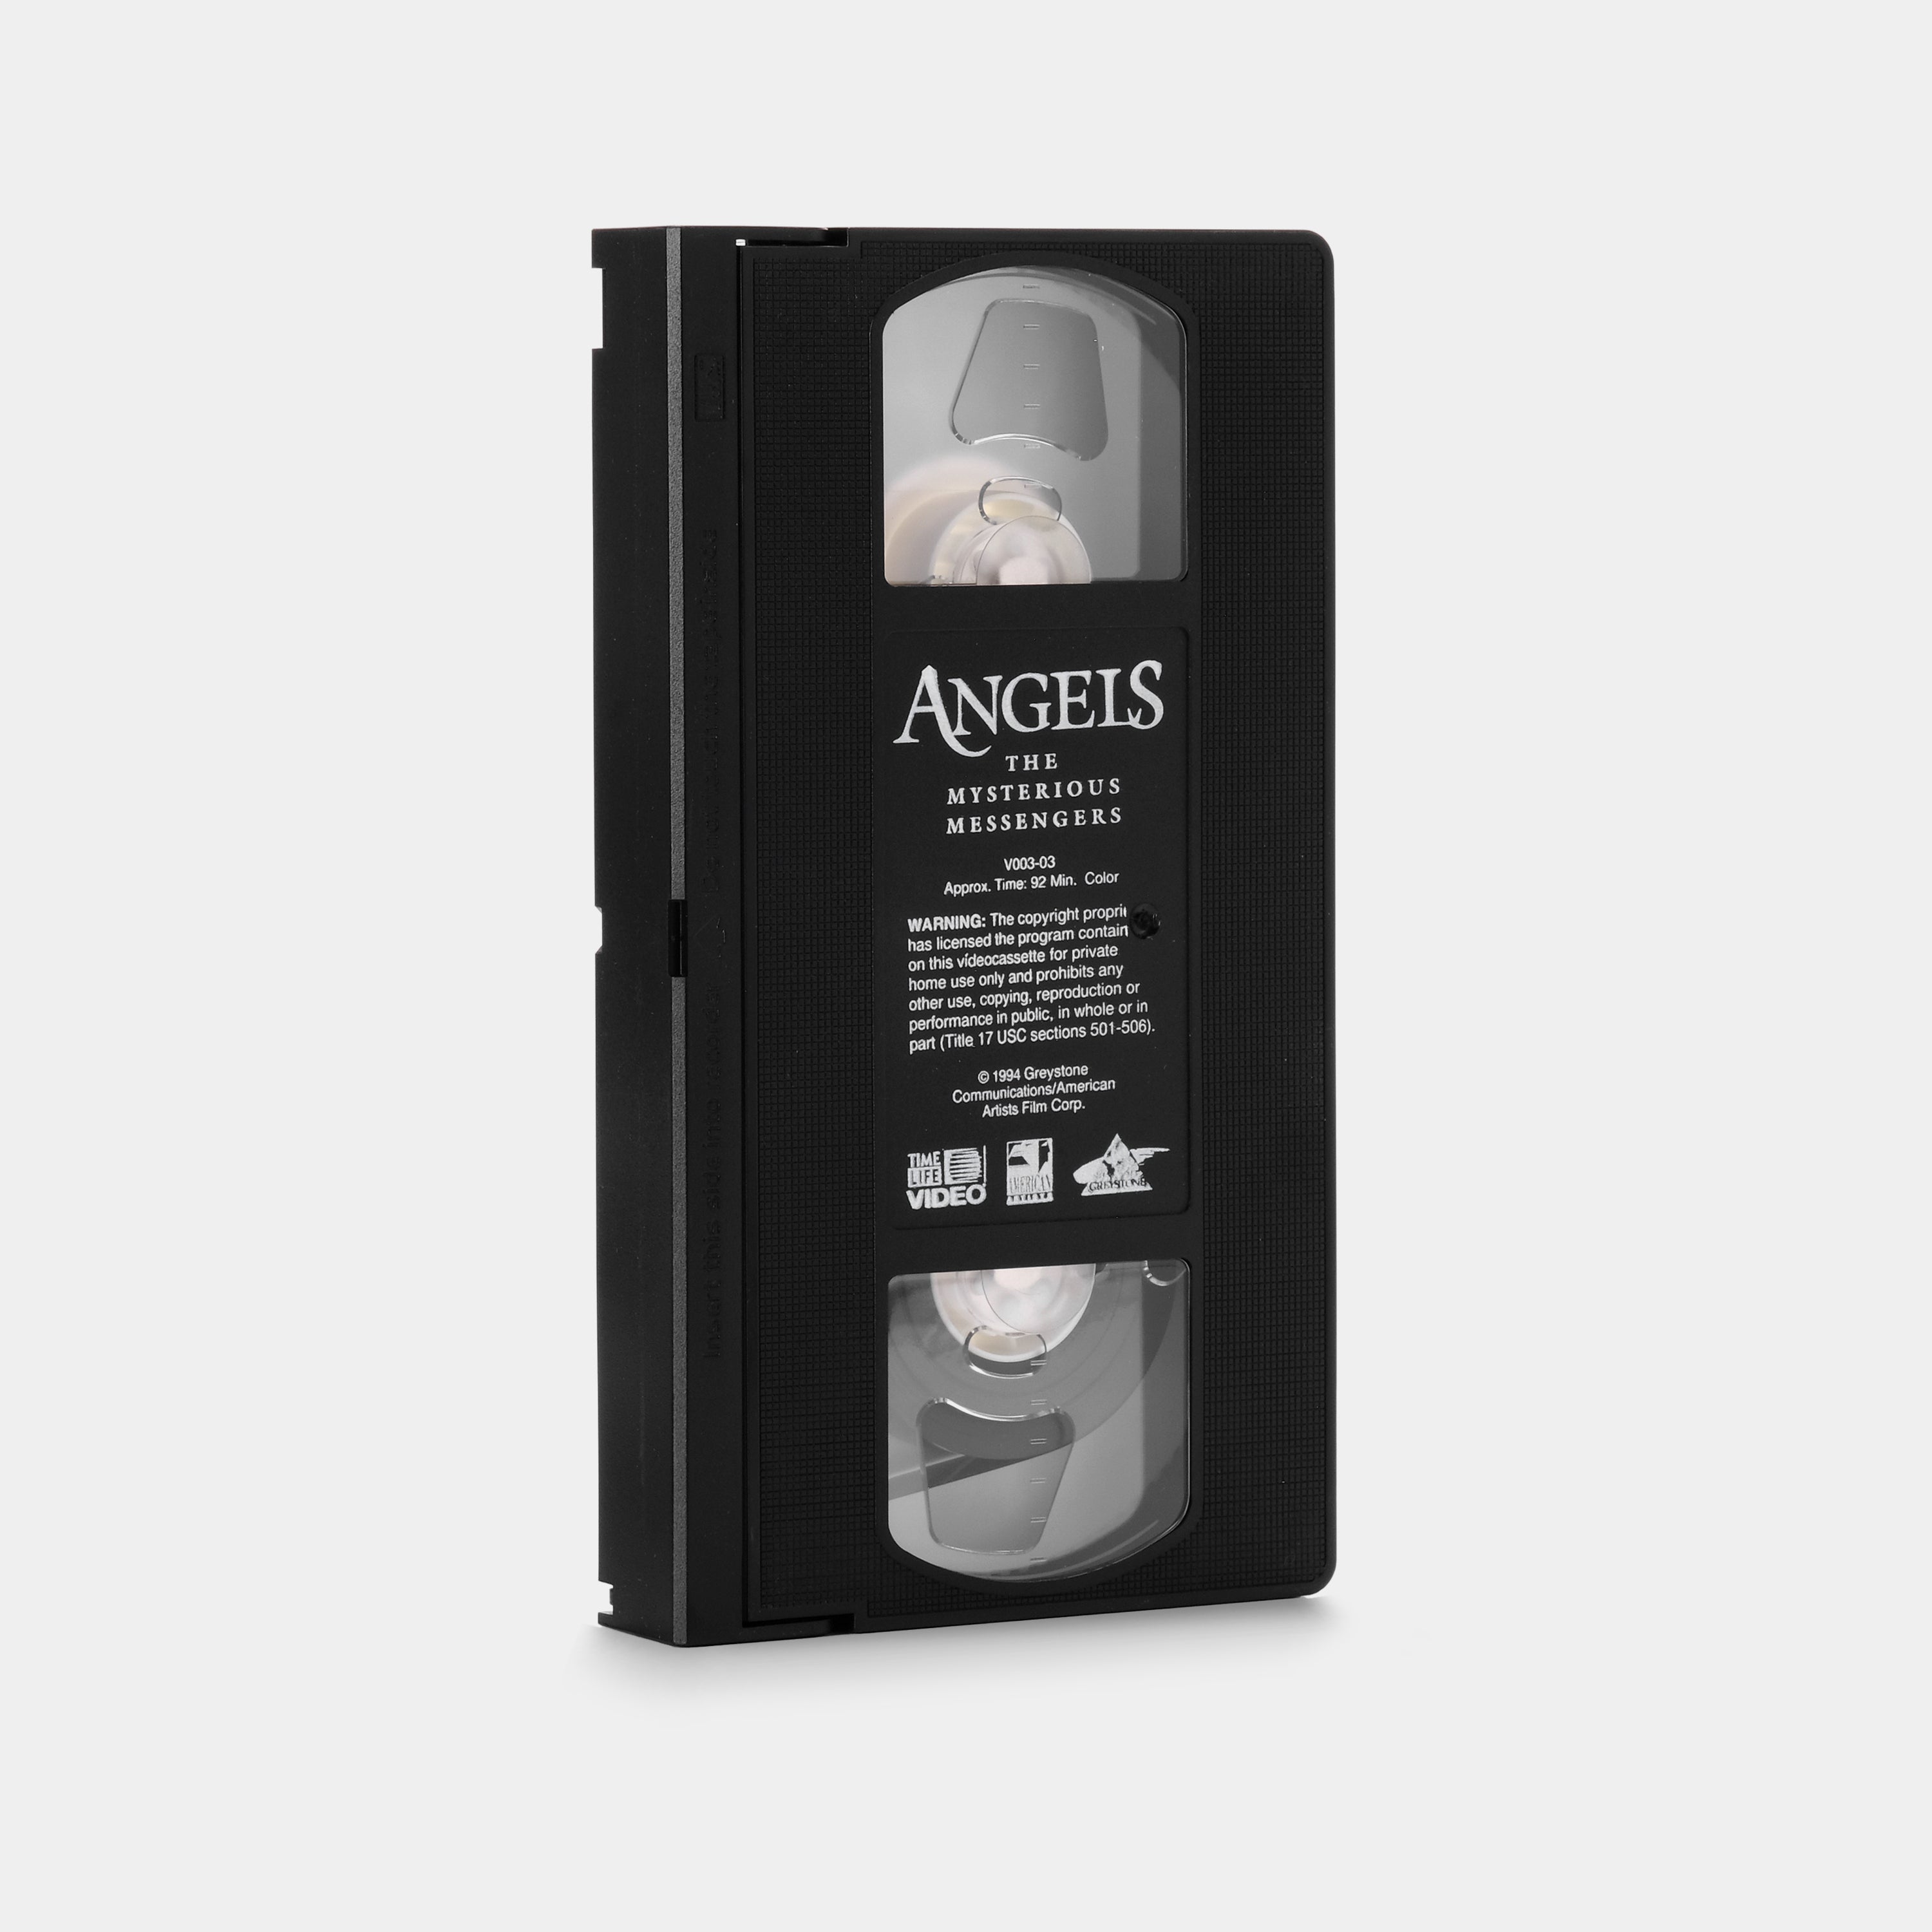 Angels: The Mysterious Messengers VHS Tape